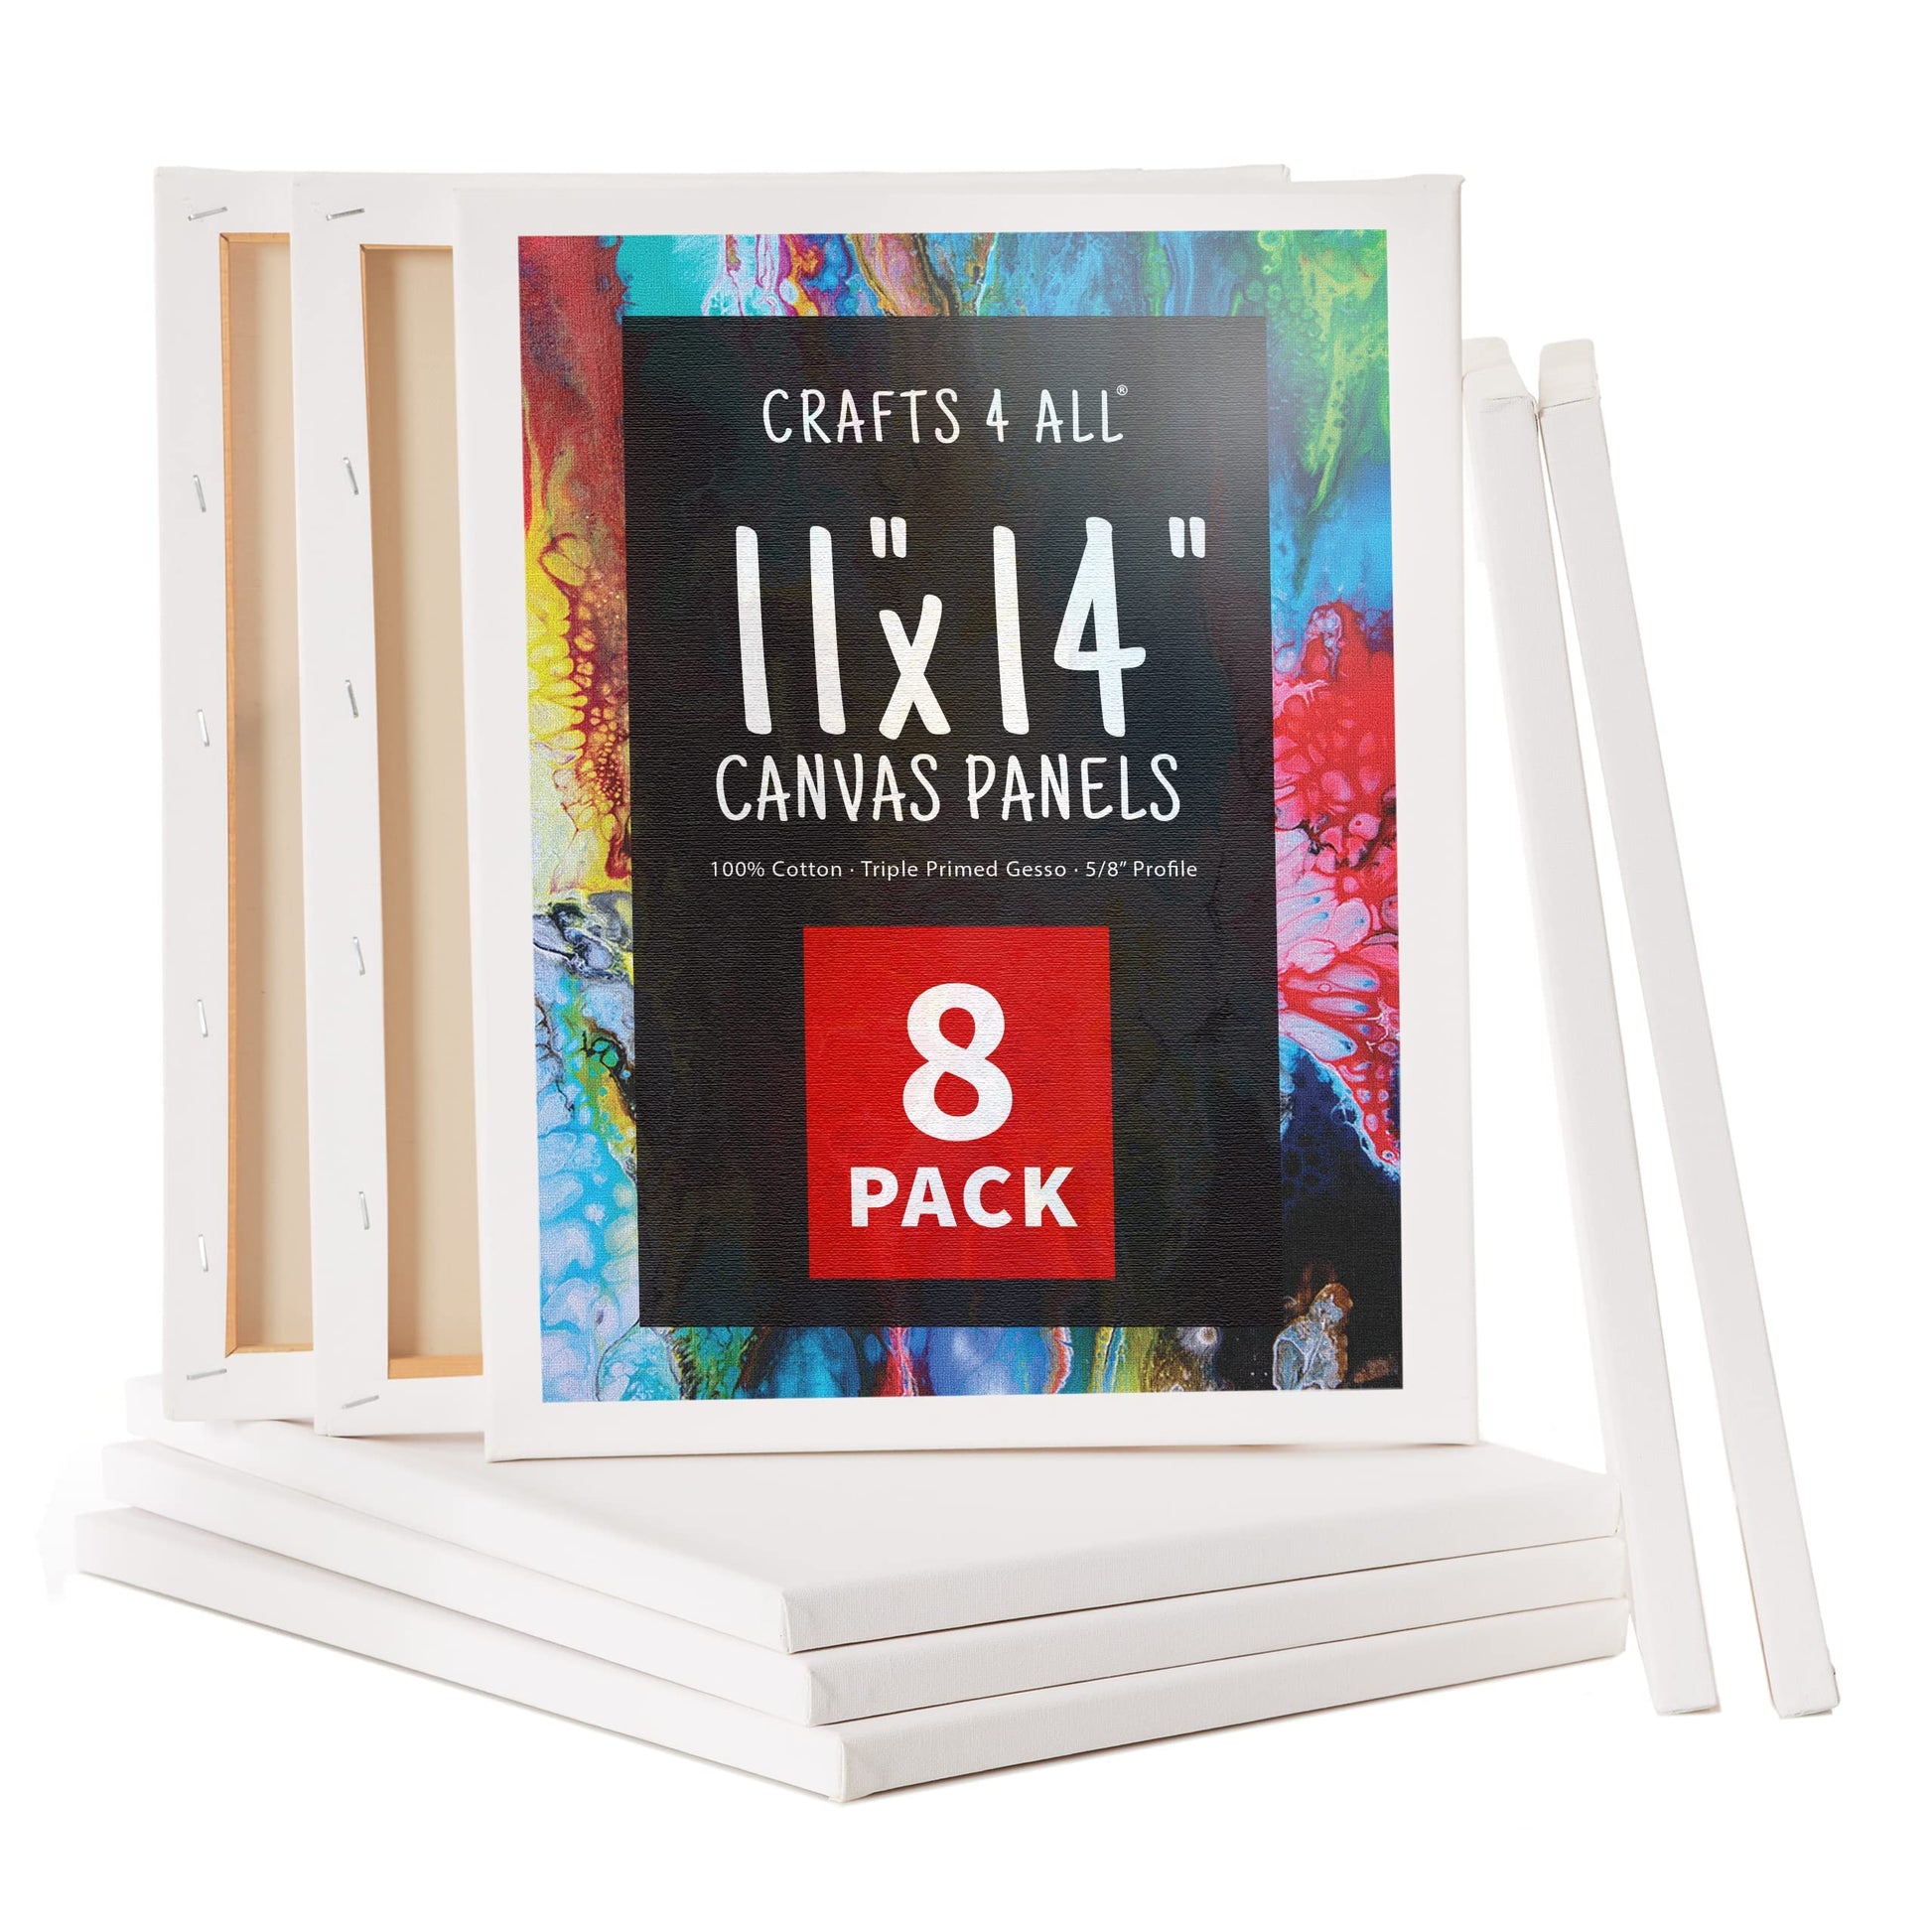 ESRICH 4 Packs Square Canvases For Painting With 4X 4, 6X 6, 8X 8,  10X 10, Painting Canvas For Oil & Acrylic Paint